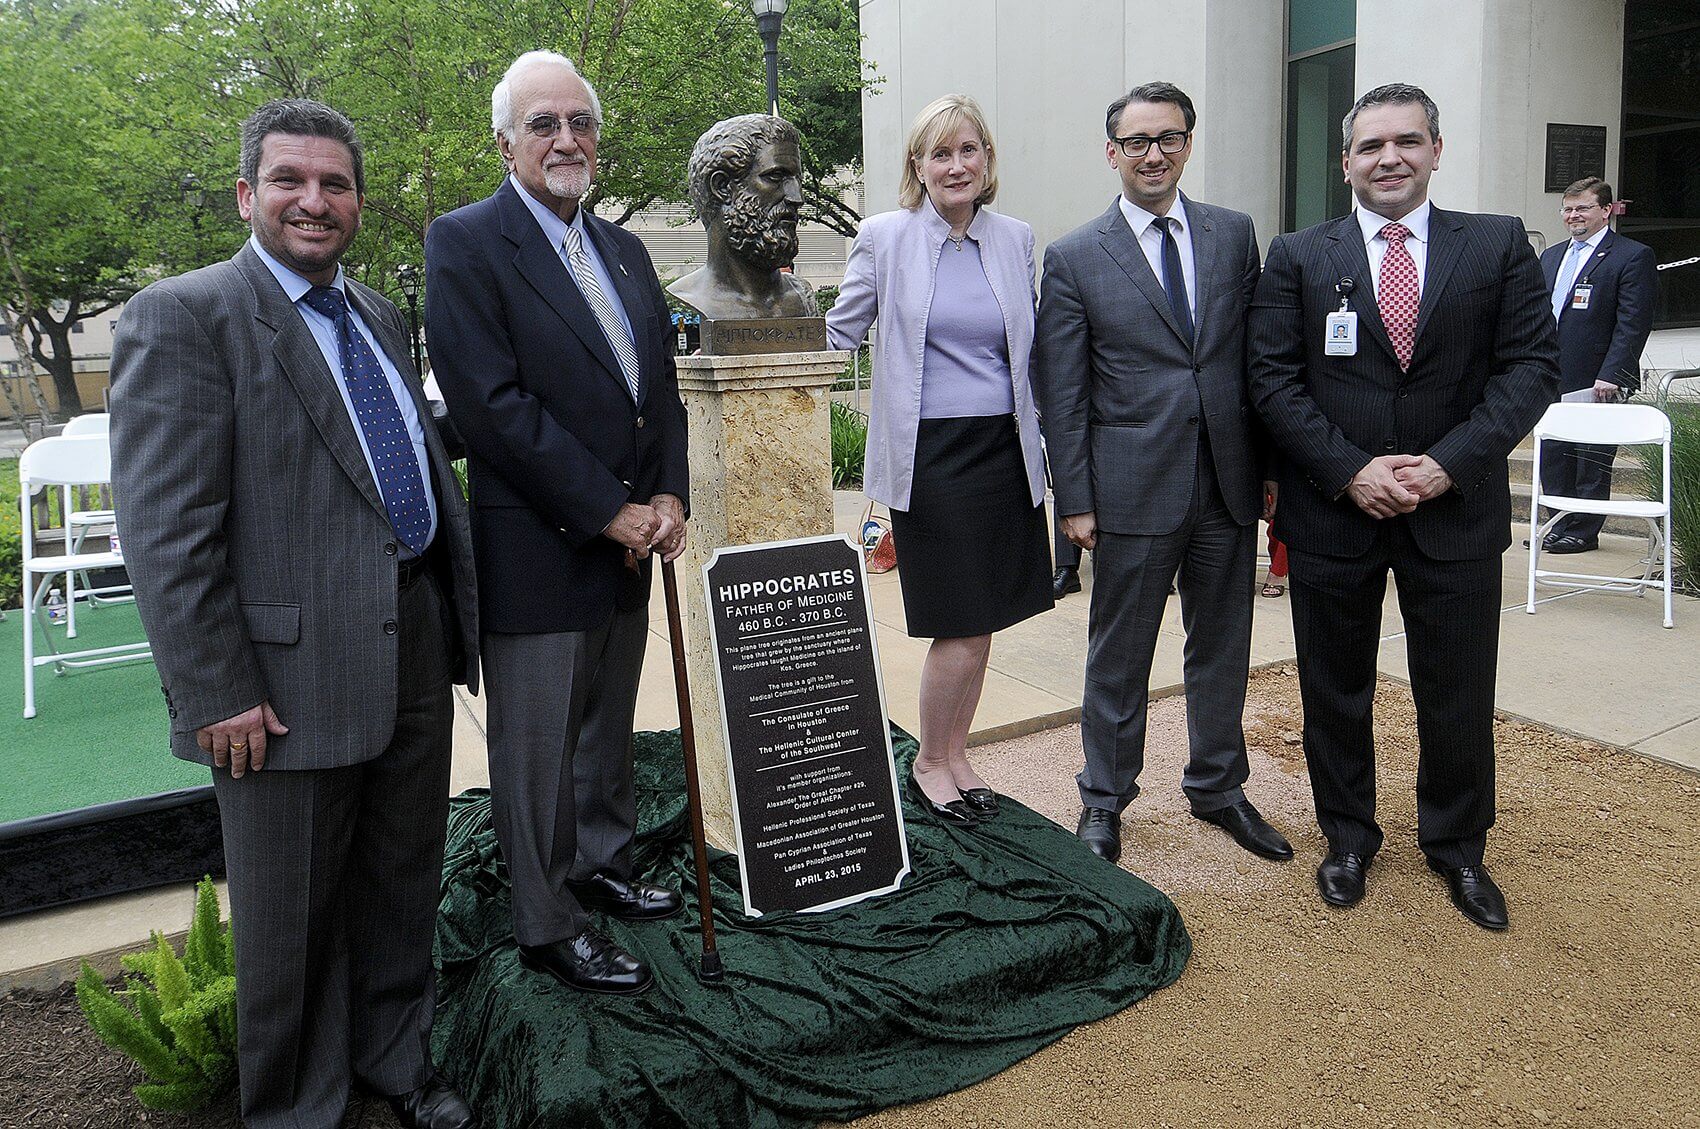 Representatives from the Hellenic Cultural Center of the Southwest, UTHealth and the Consulate of Greece in Houston stand next to the bronze bust of Hippocrates that was unveiled Thursday, April 23, at UTHealth Medical School. (Credit: Dwight Andrews, UTHealth Medical School Office of Communications)